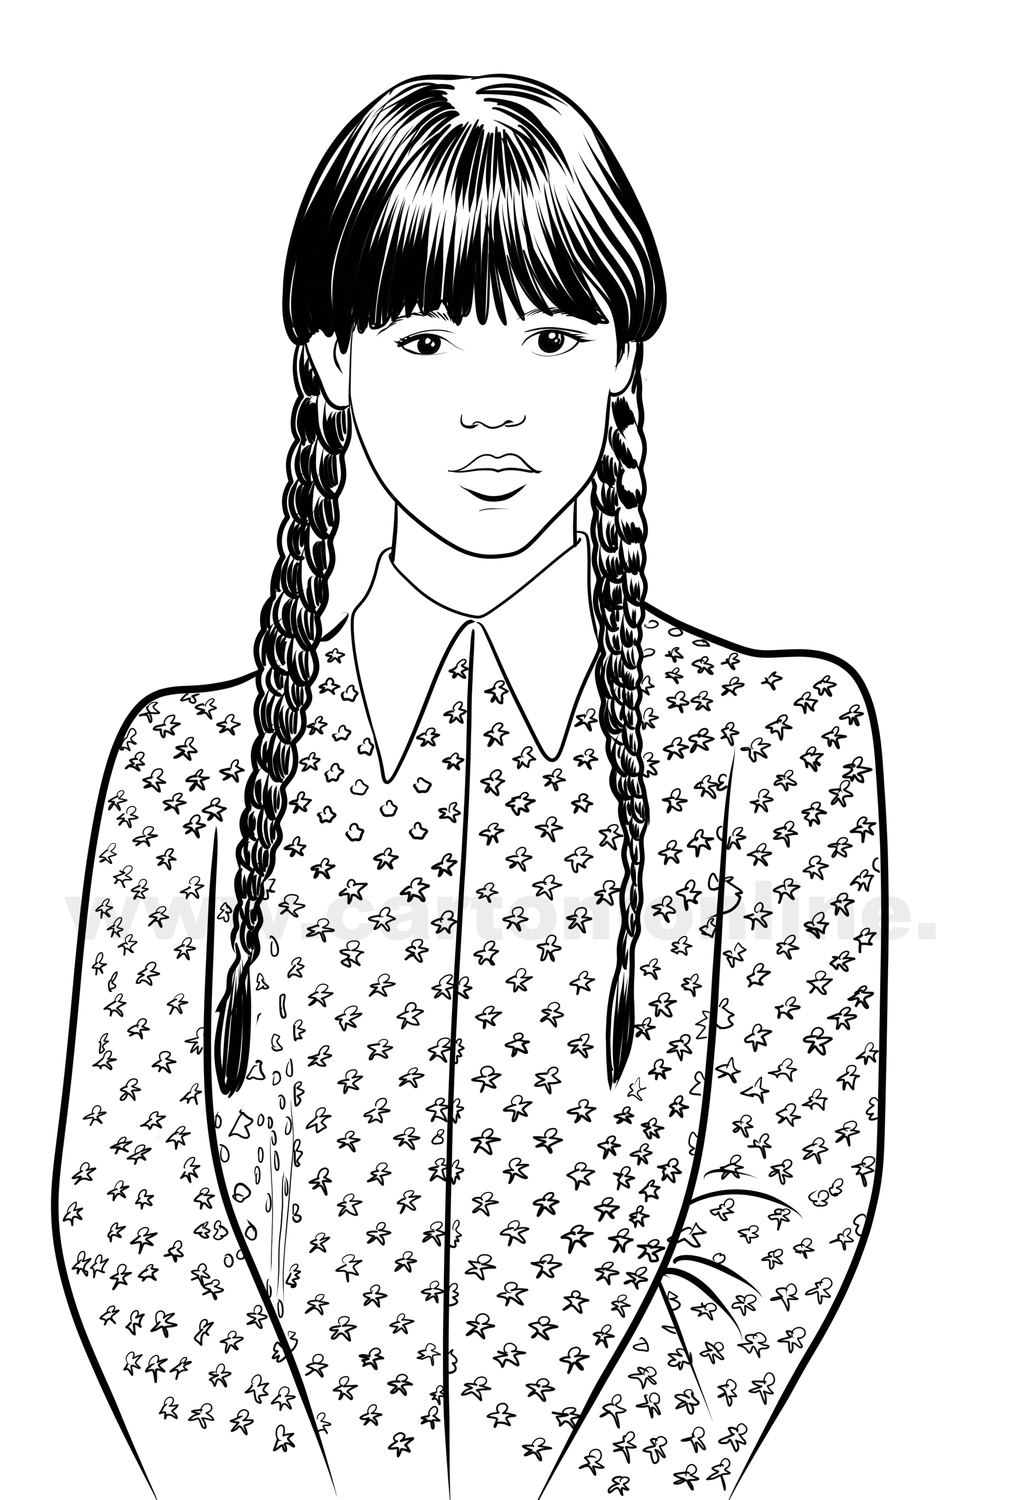 Wednesday Addams (Jenna Ortega) From Wednesday (Tv Series) Coloring Page à Coloriages Mercredi